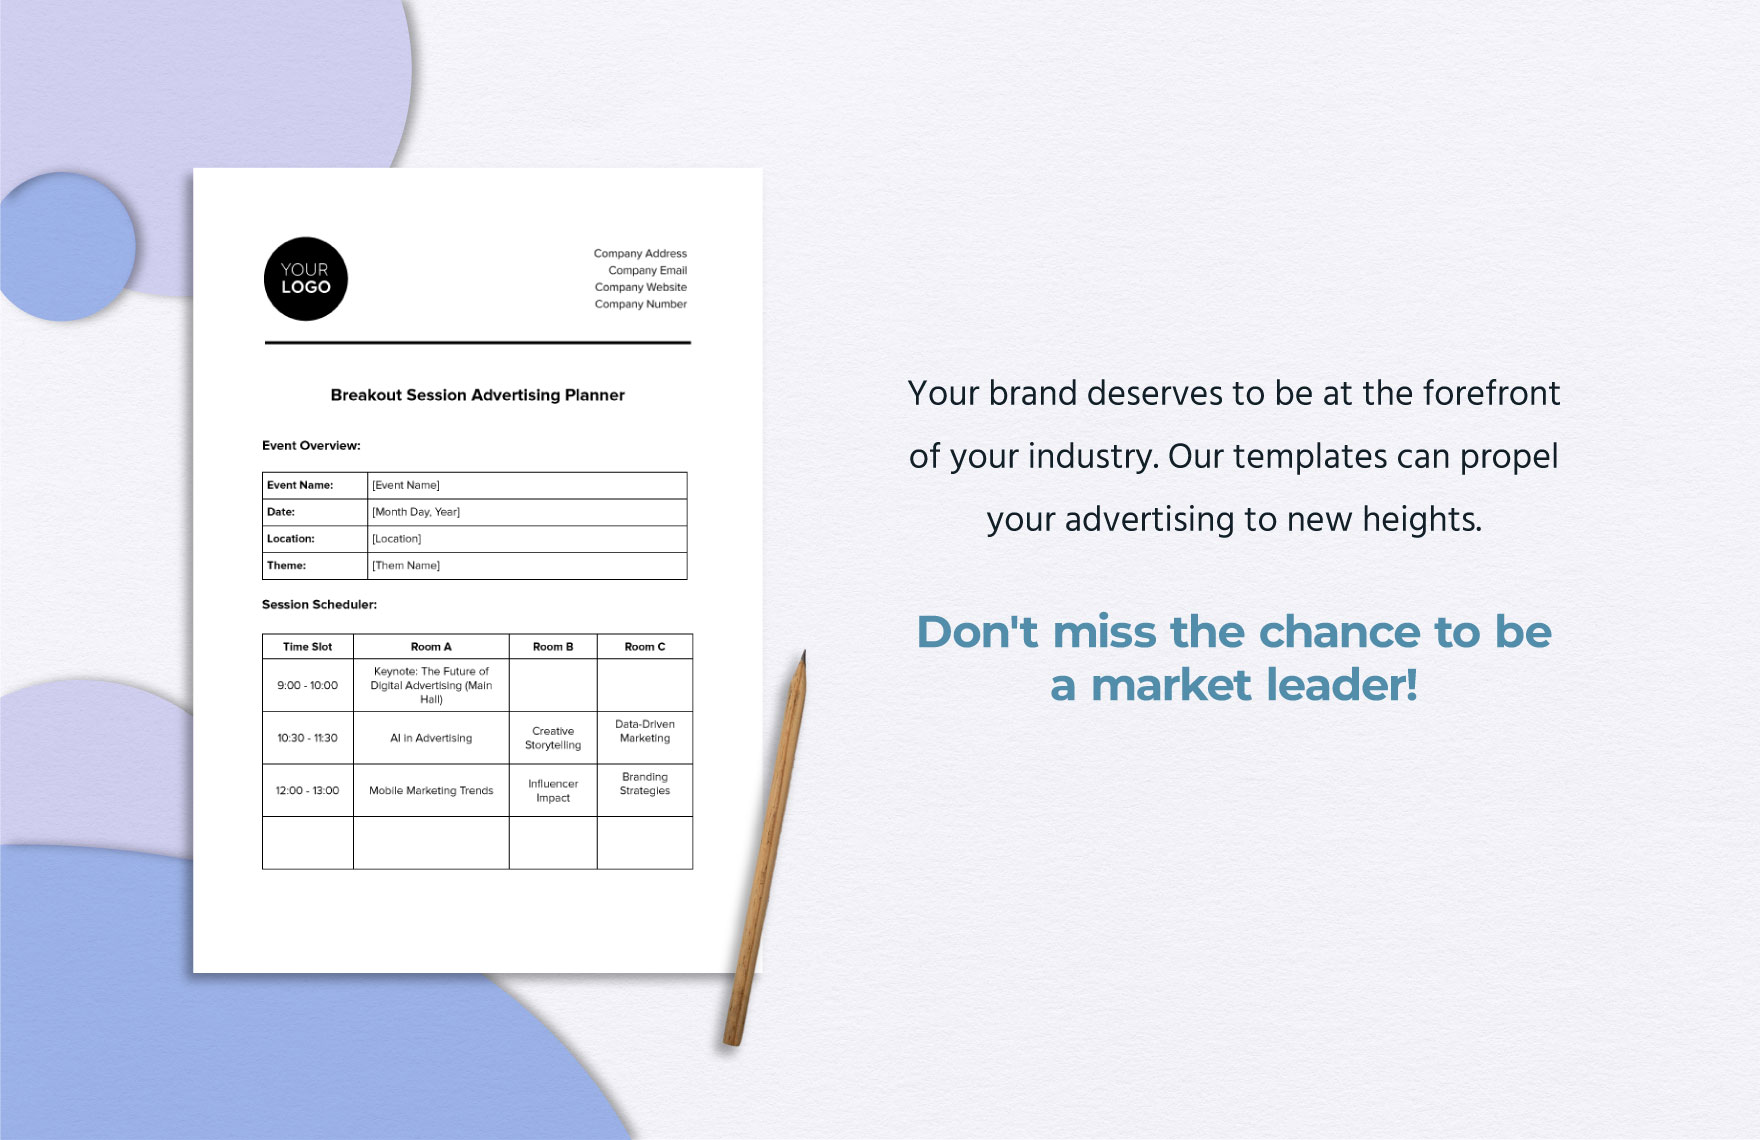 Breakout Session Advertising Planner Template